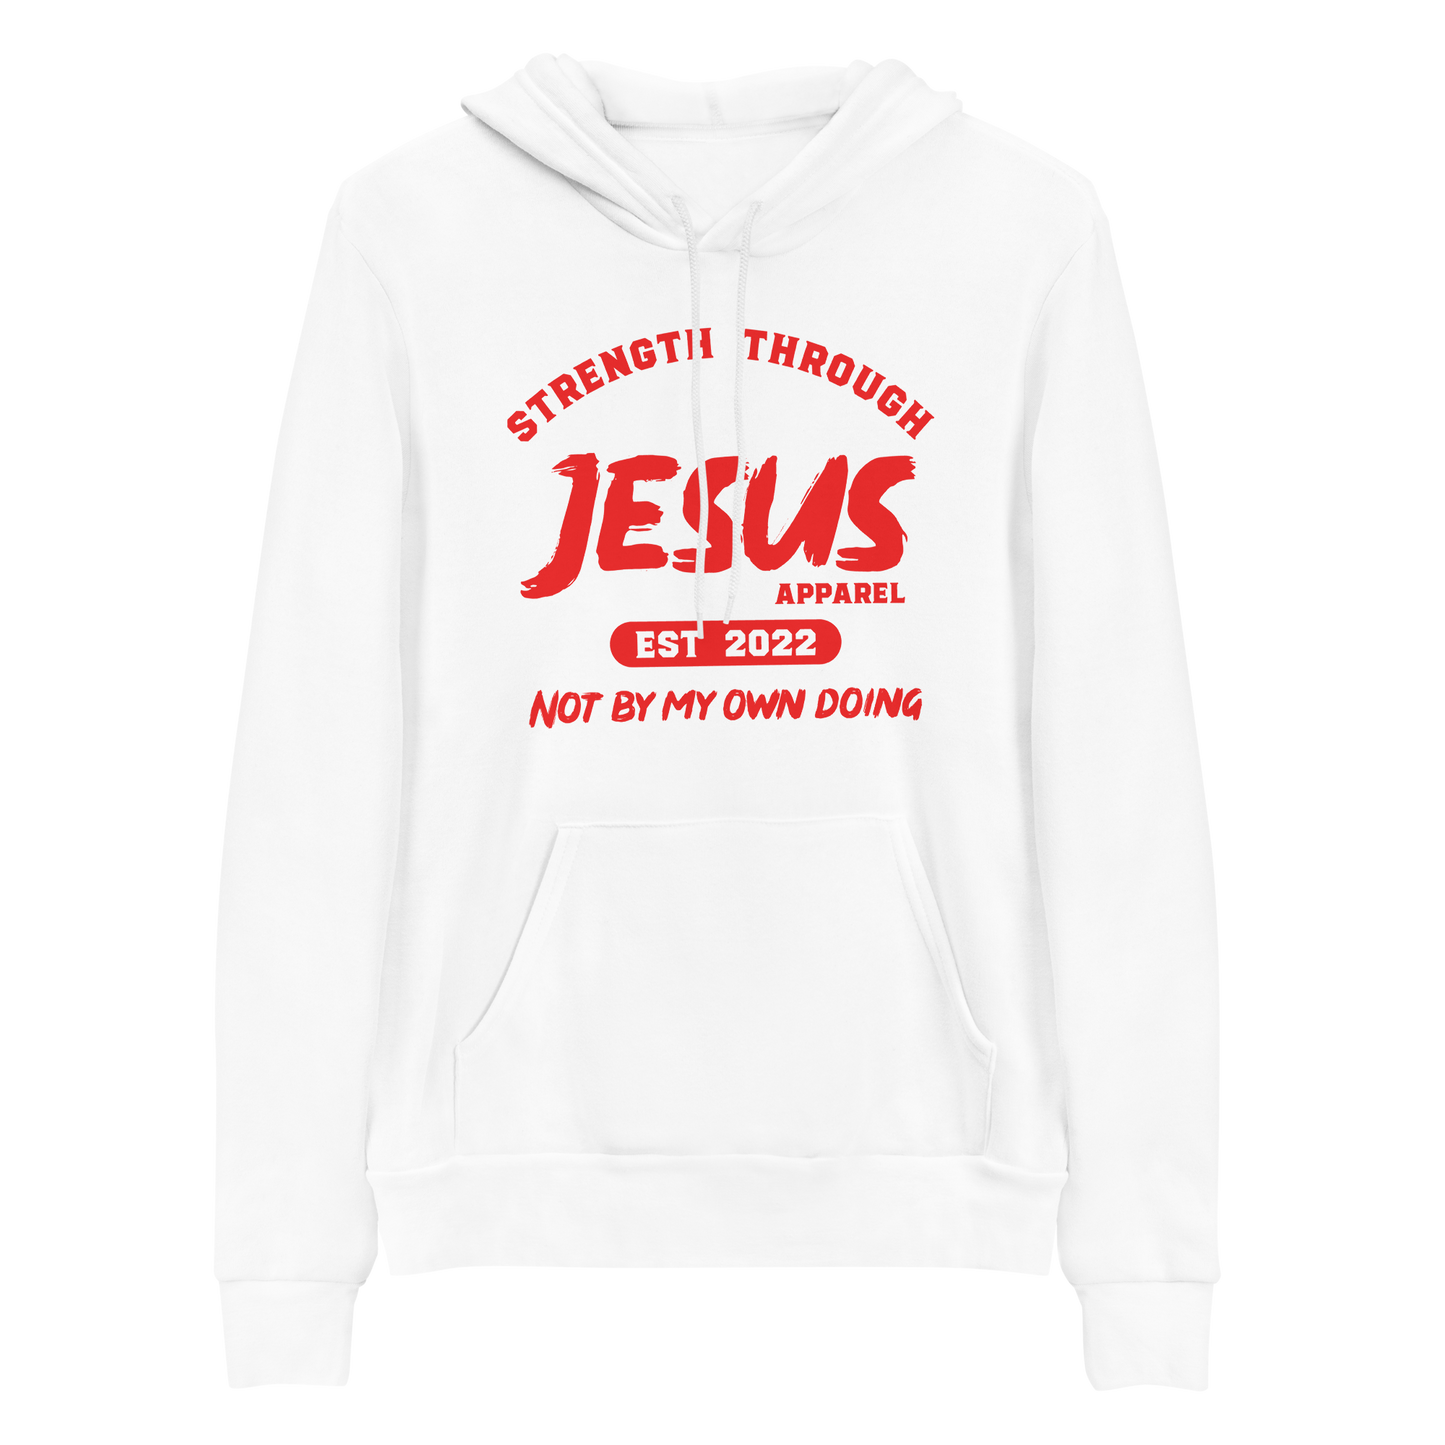 Unisex "Not By My Own Doing" Hoodie